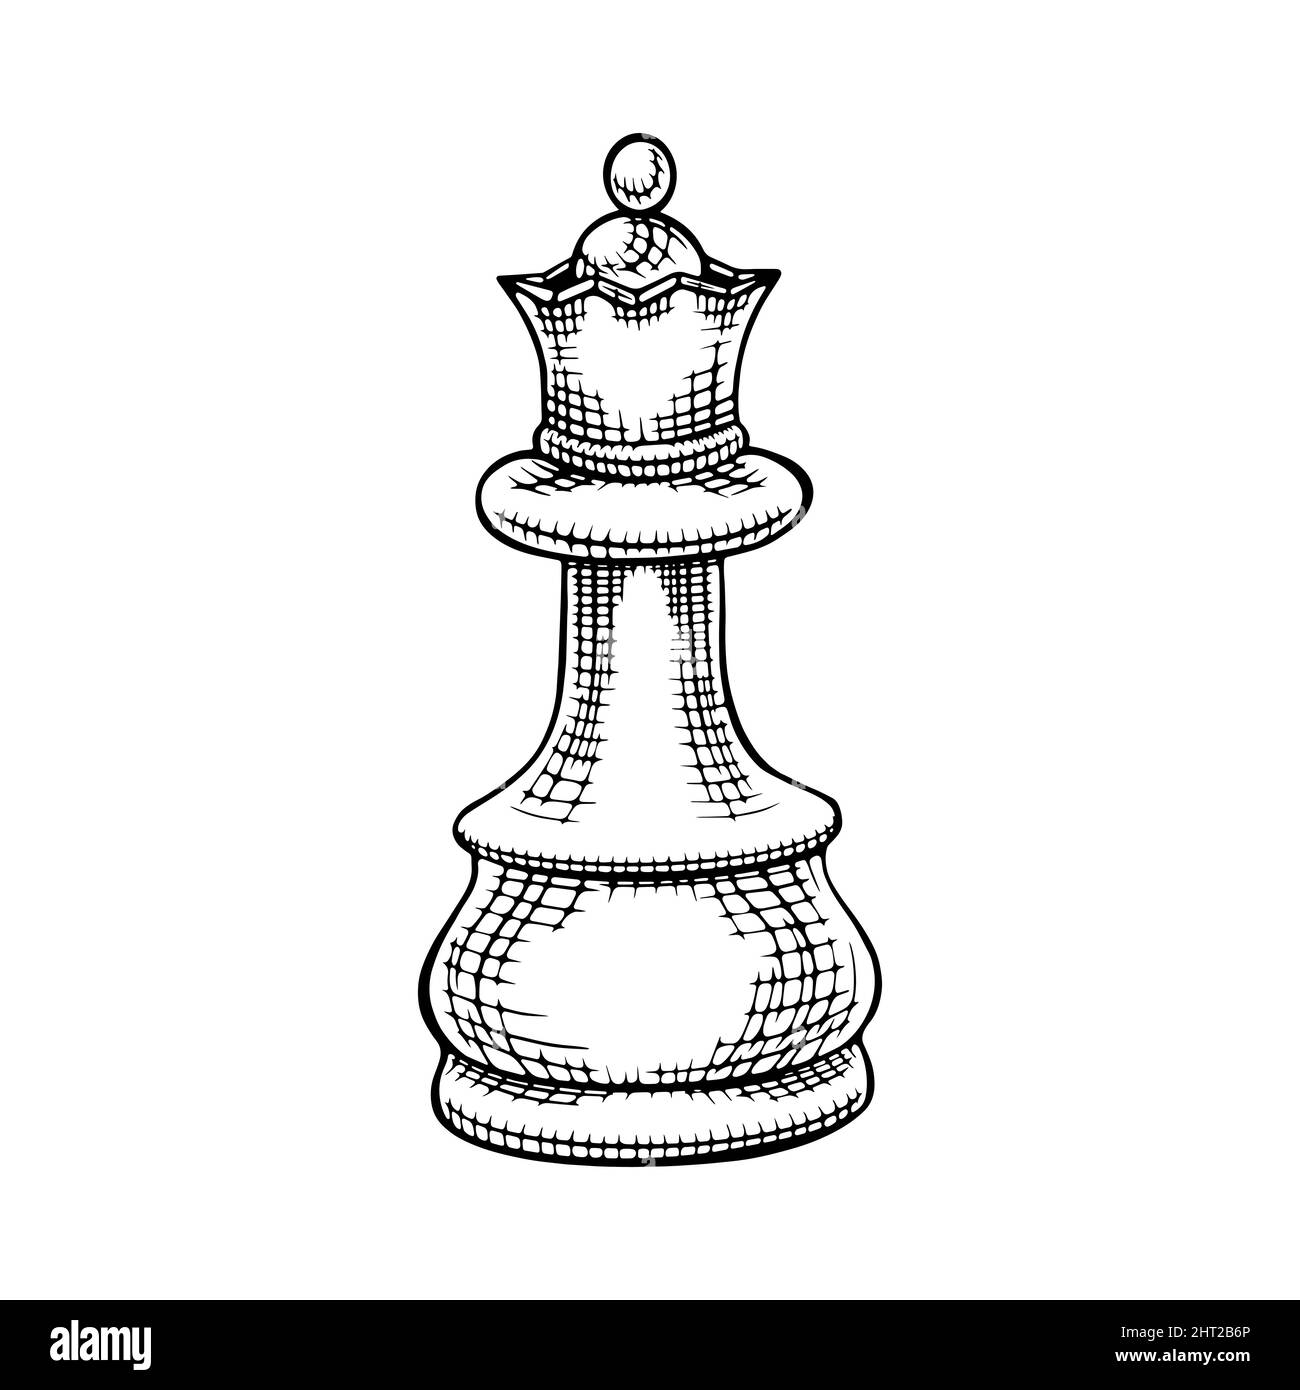 1696 Chess King Sketch Images Stock Photos  Vectors  Shutterstock